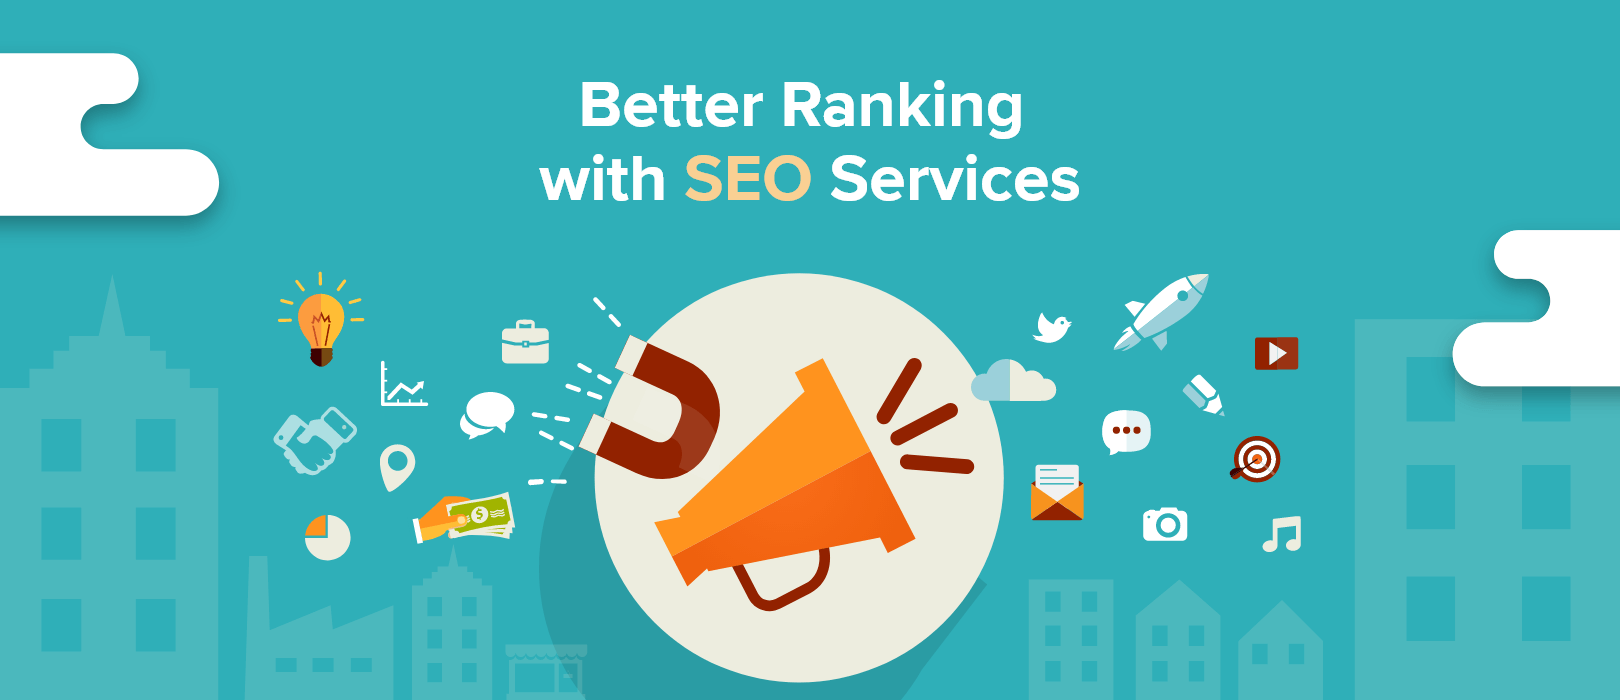 Want to know about the qualities of top SEO agencies: Keep Reading